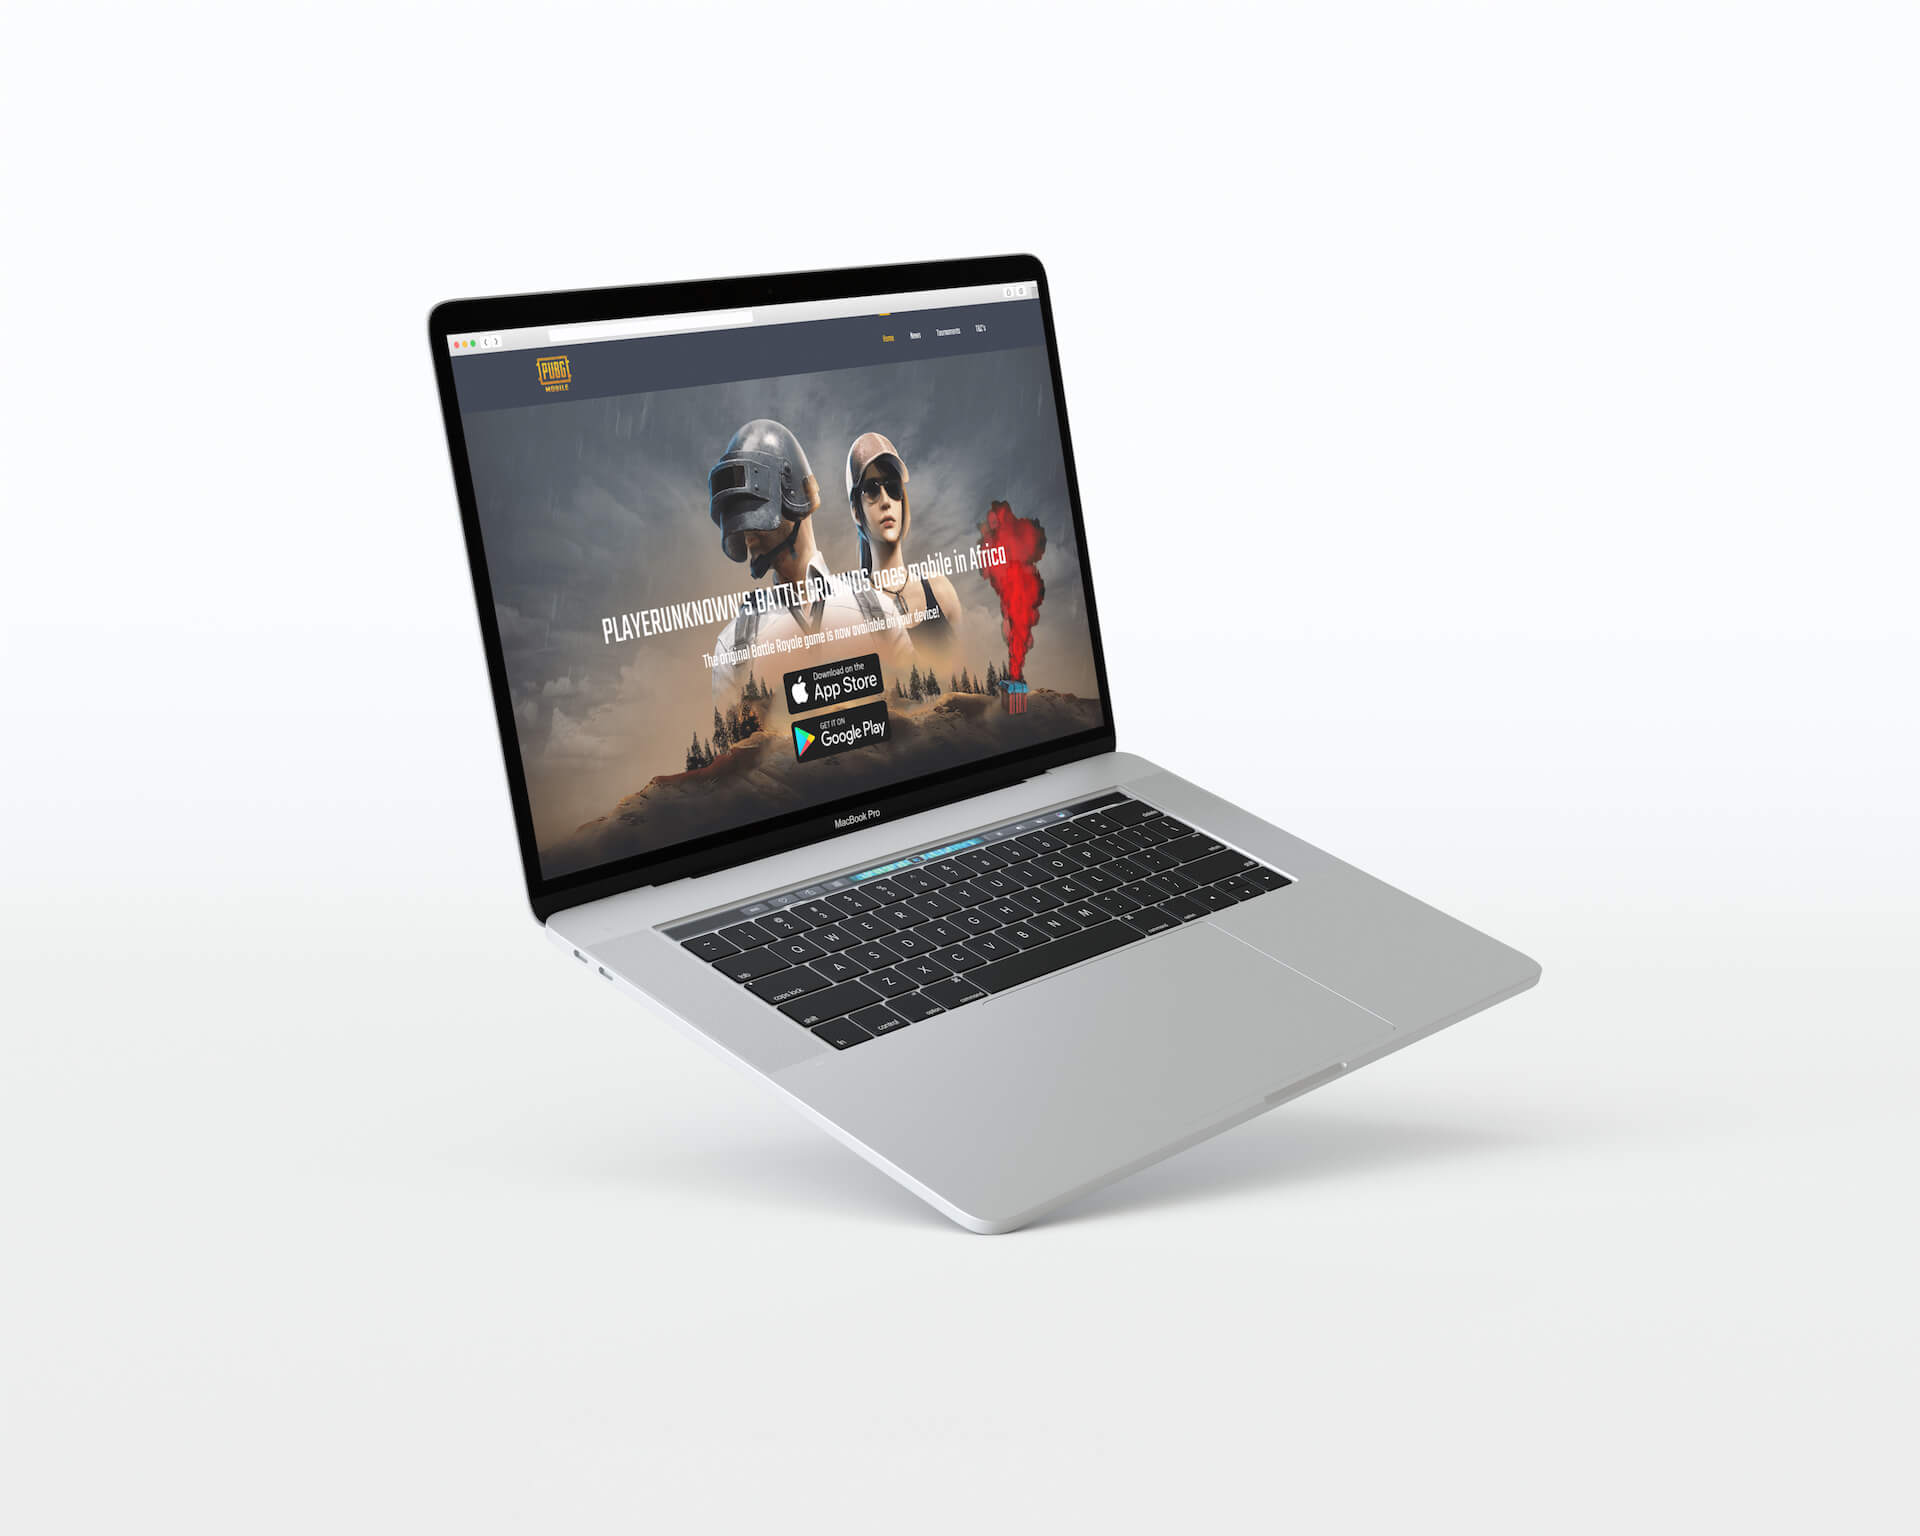 download player unknown for mac